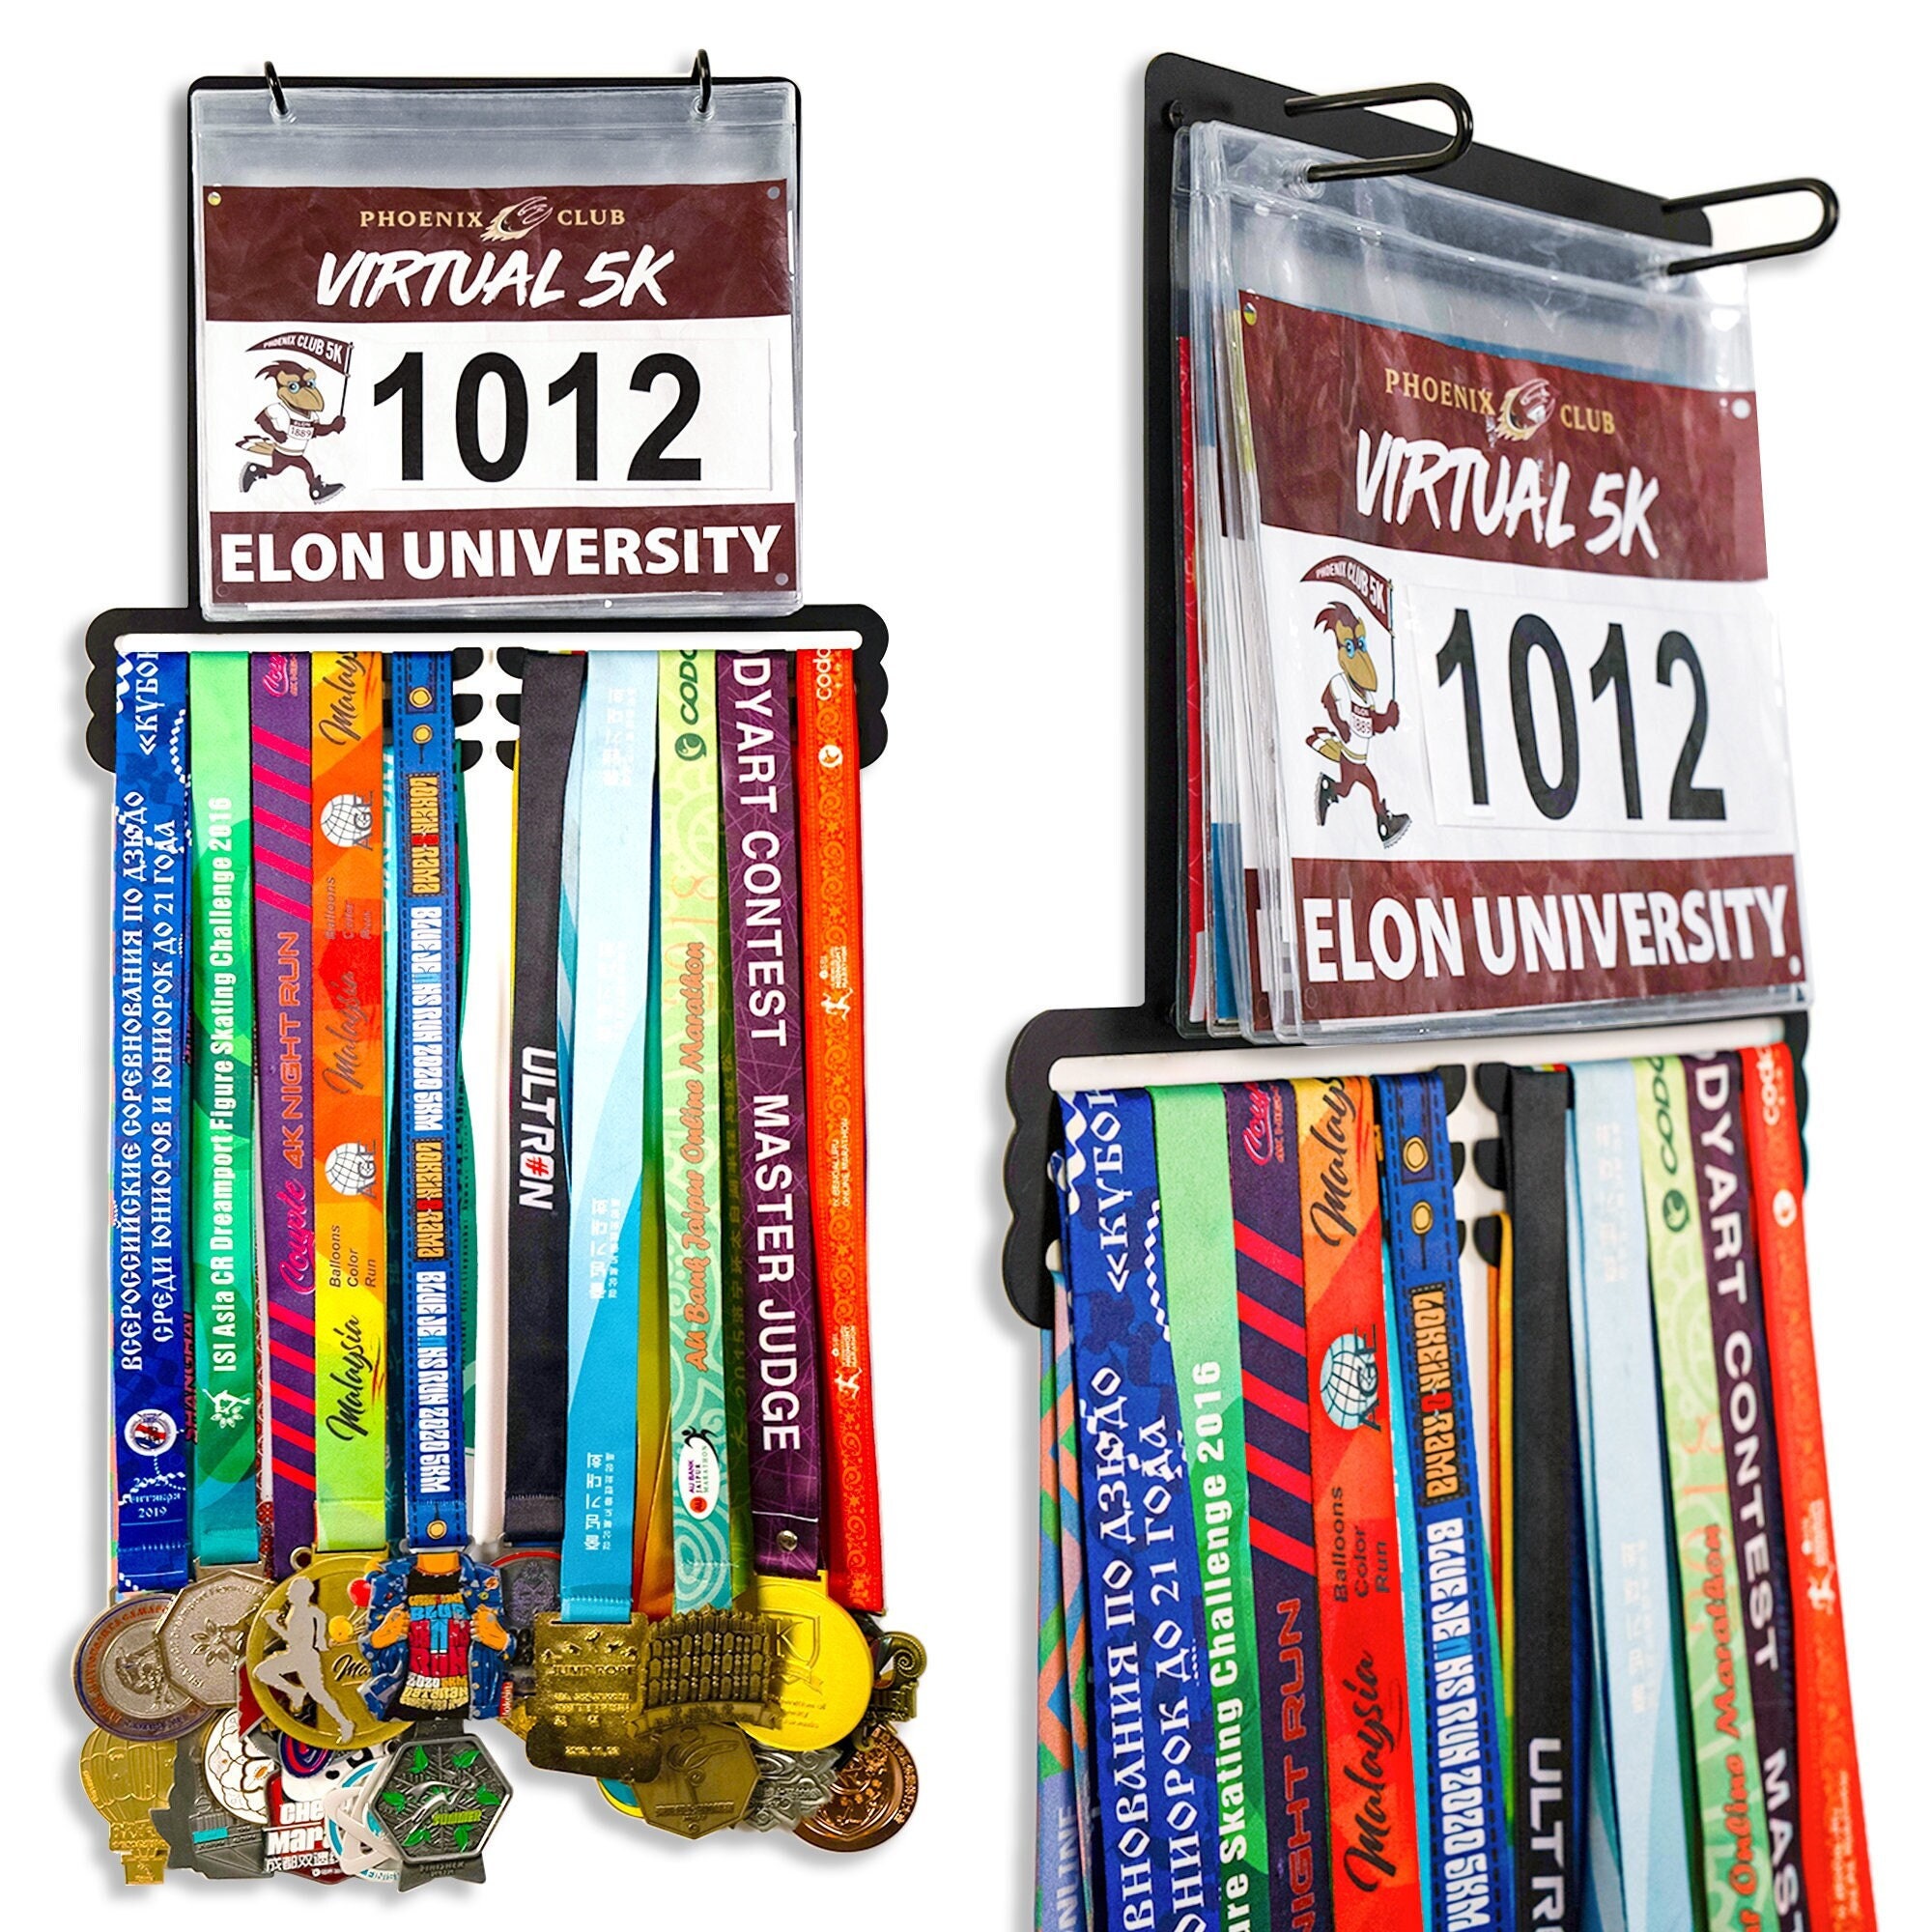  HZE Marathon Running Bib Holder and Medal Hanger Display, Black  Race Bid Holder and Medal Display with 16 Hooks and 10 Plastic Boards for  Gymnastics, Race, Soccer, Swim and Running 